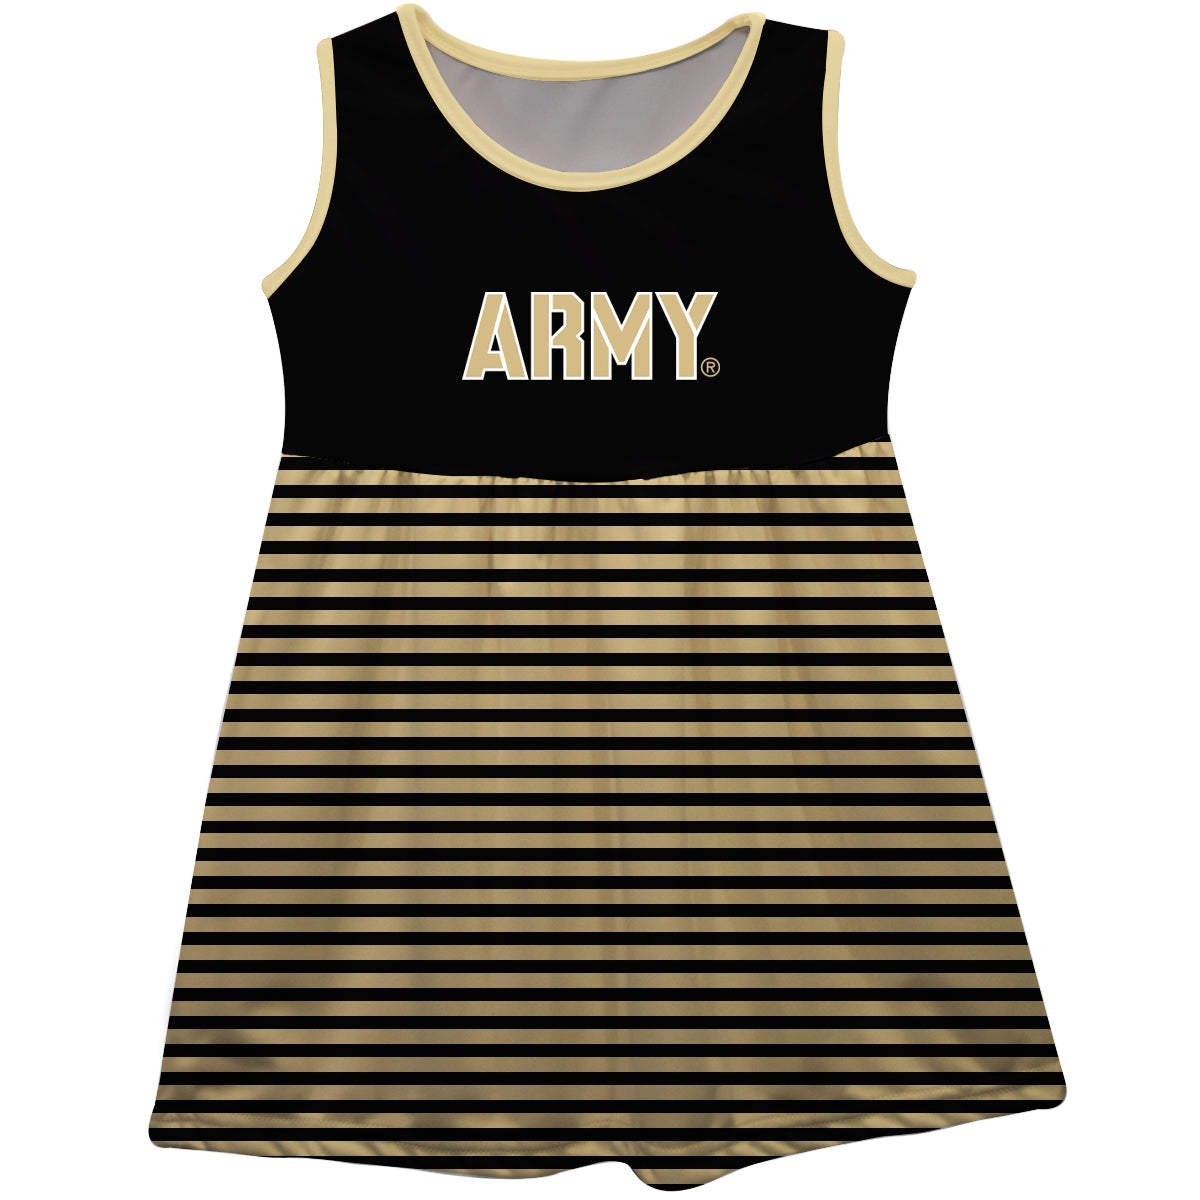 US Military ARMY Black Knights Girls Game Day Sleeveless Tank Dress Solid Black Logo Stripes on Skirt by Vive La Fete-Campus-Wardrobe